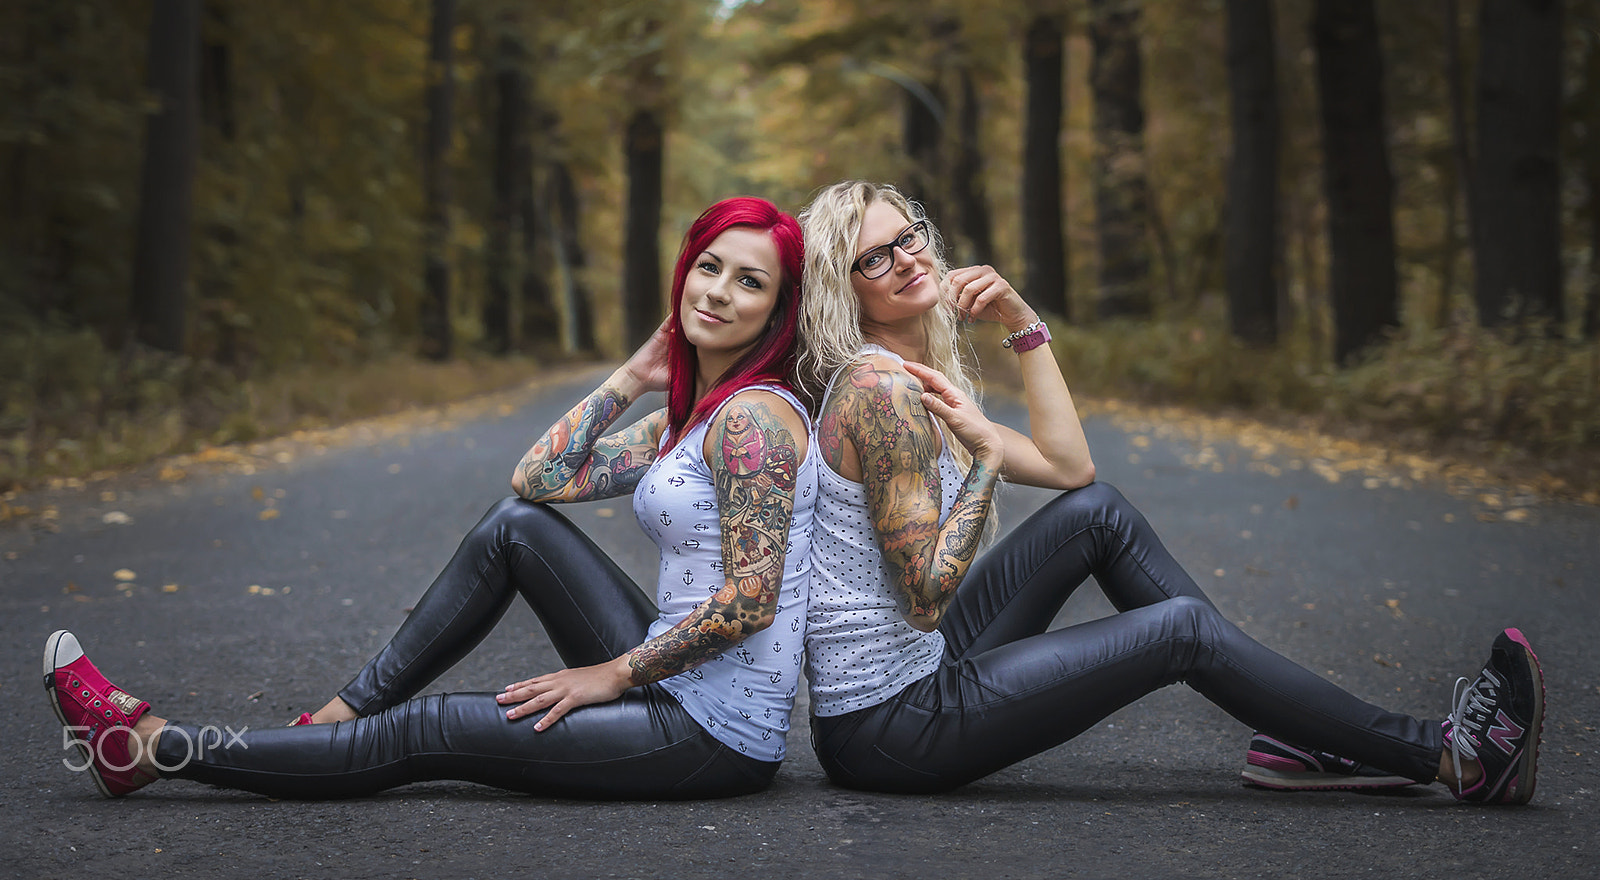 Sony a7R sample photo. The inked photography